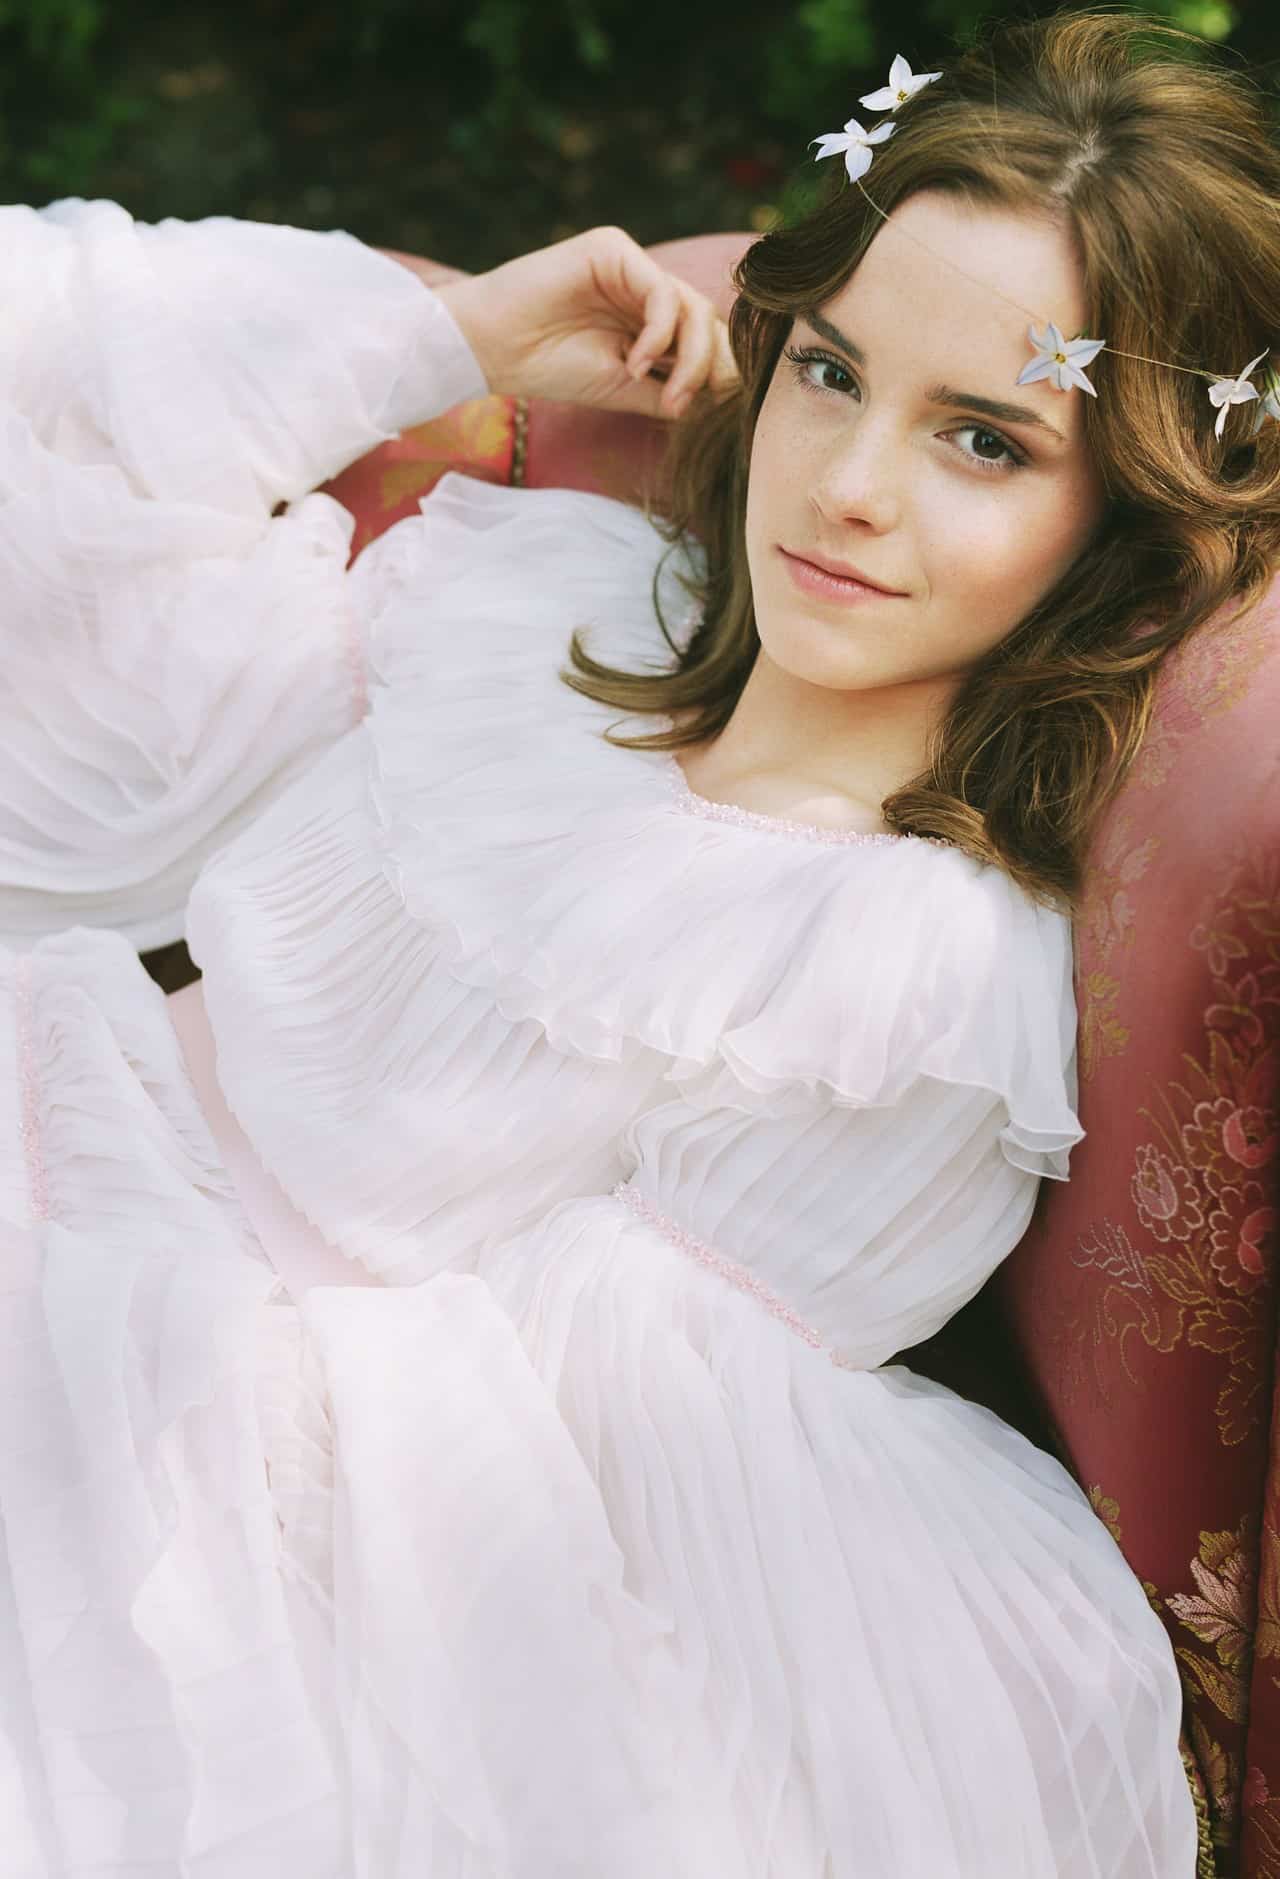 Emma Watson's Natural Beauty Is on Full Display in Bravo Magazine Spread